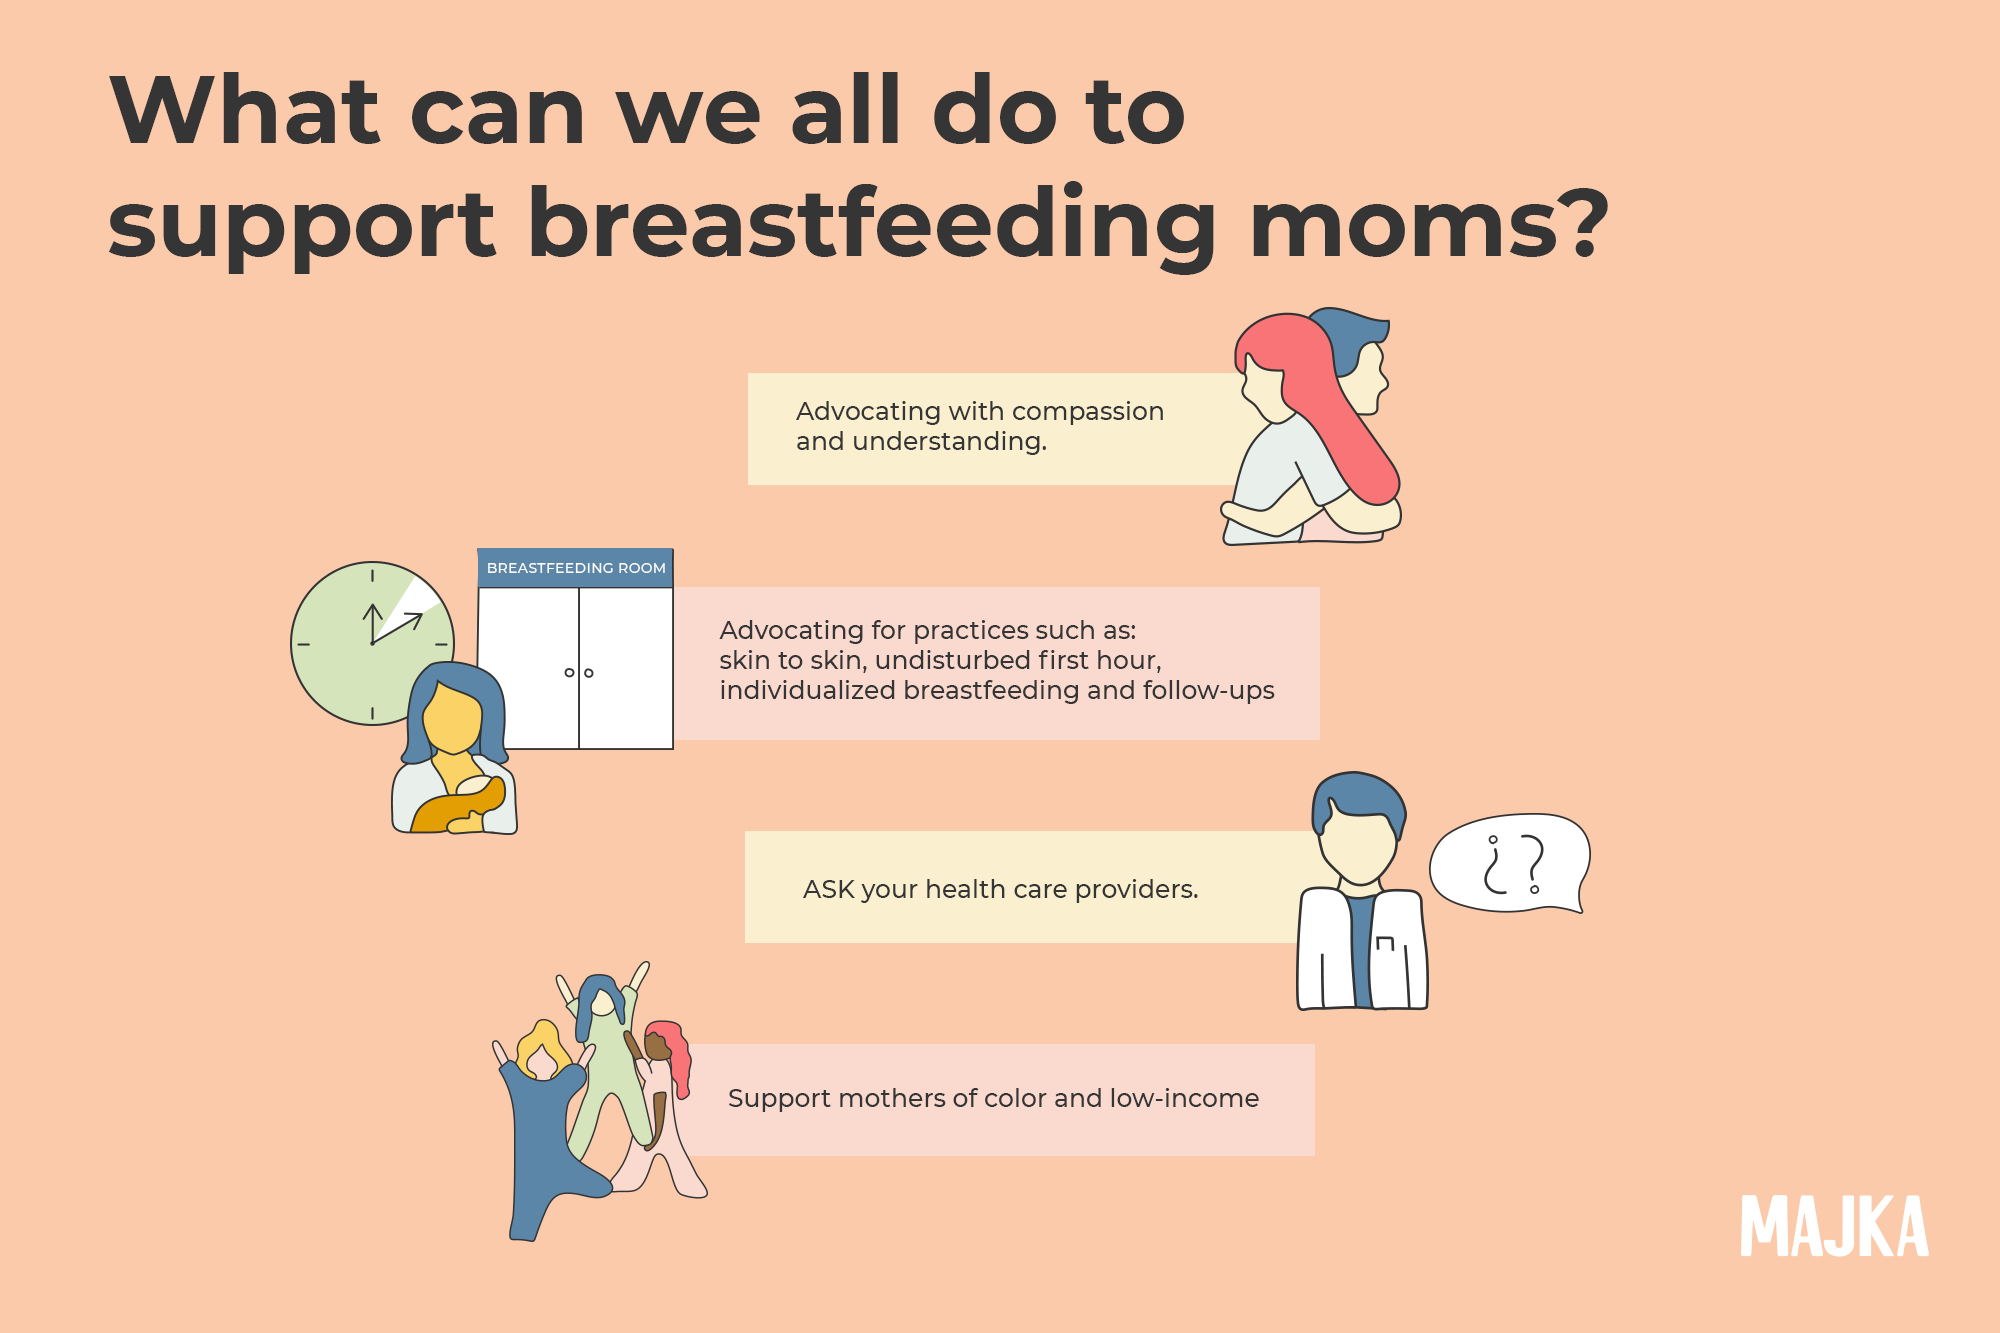 What Can We All Do to Support Breastfeeding Moms?